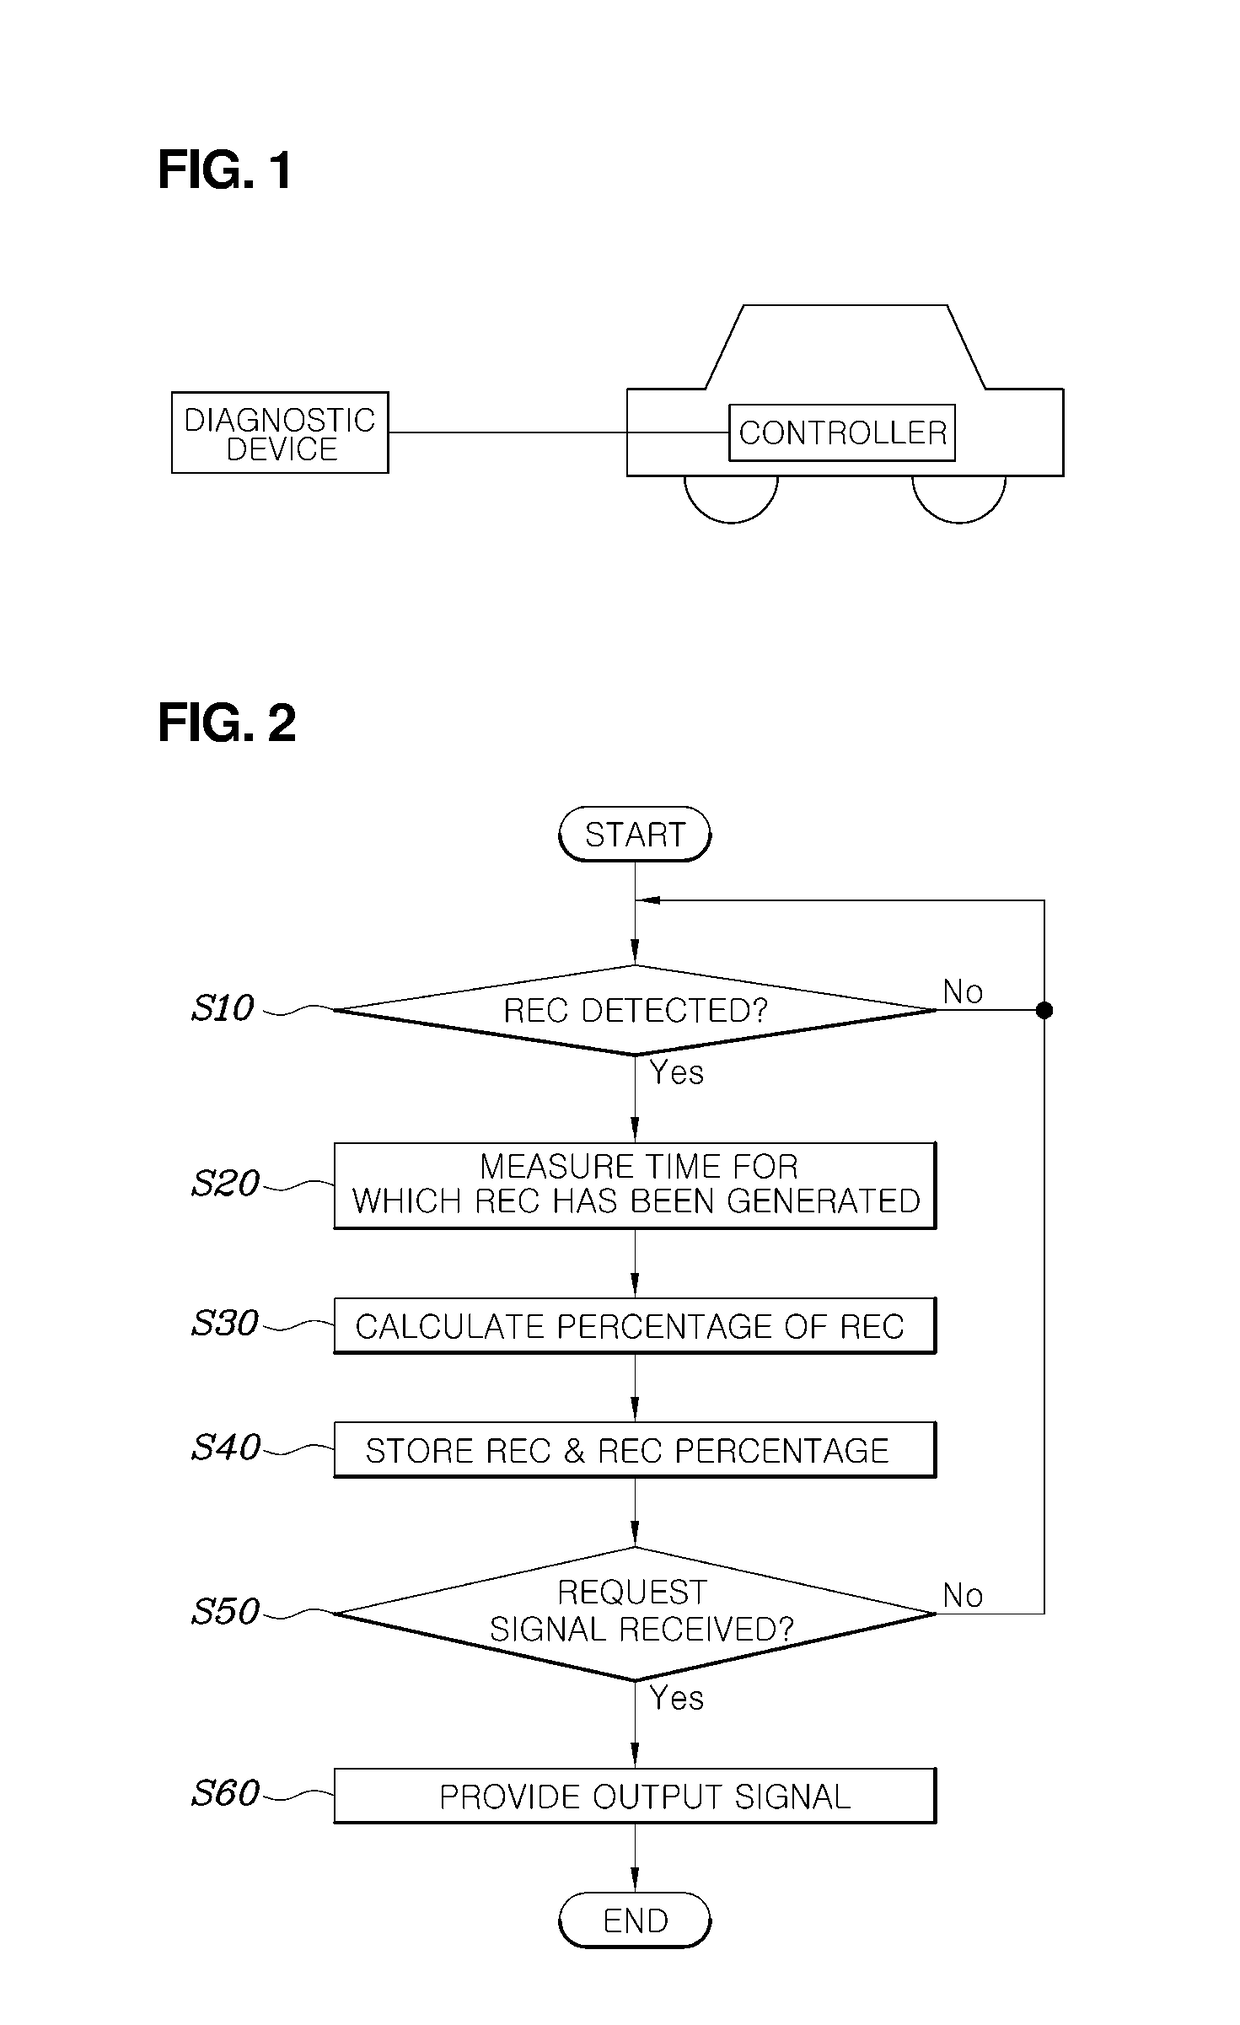 Fault diagnosis method for vehicle